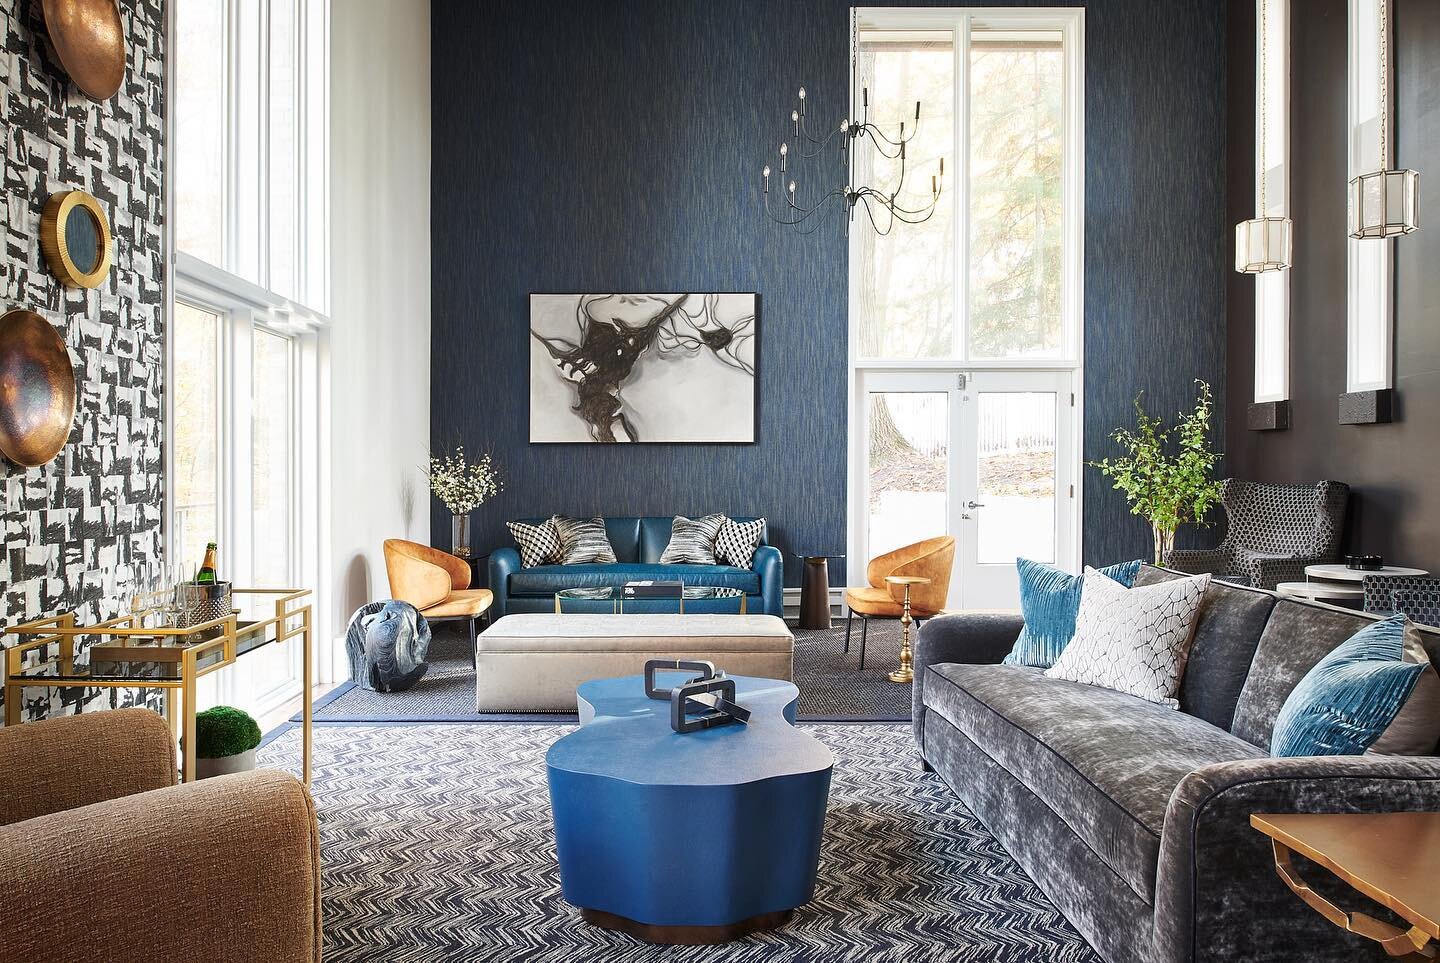 Eternally grateful for clients who trust my vision and let me create fabulous rooms for them ▪️ Recently called &ldquo;The Blue Room&rdquo;, this one is as stunning as it is comfortable and inviting ▪️Made for big gatherings and lots of celebrations,